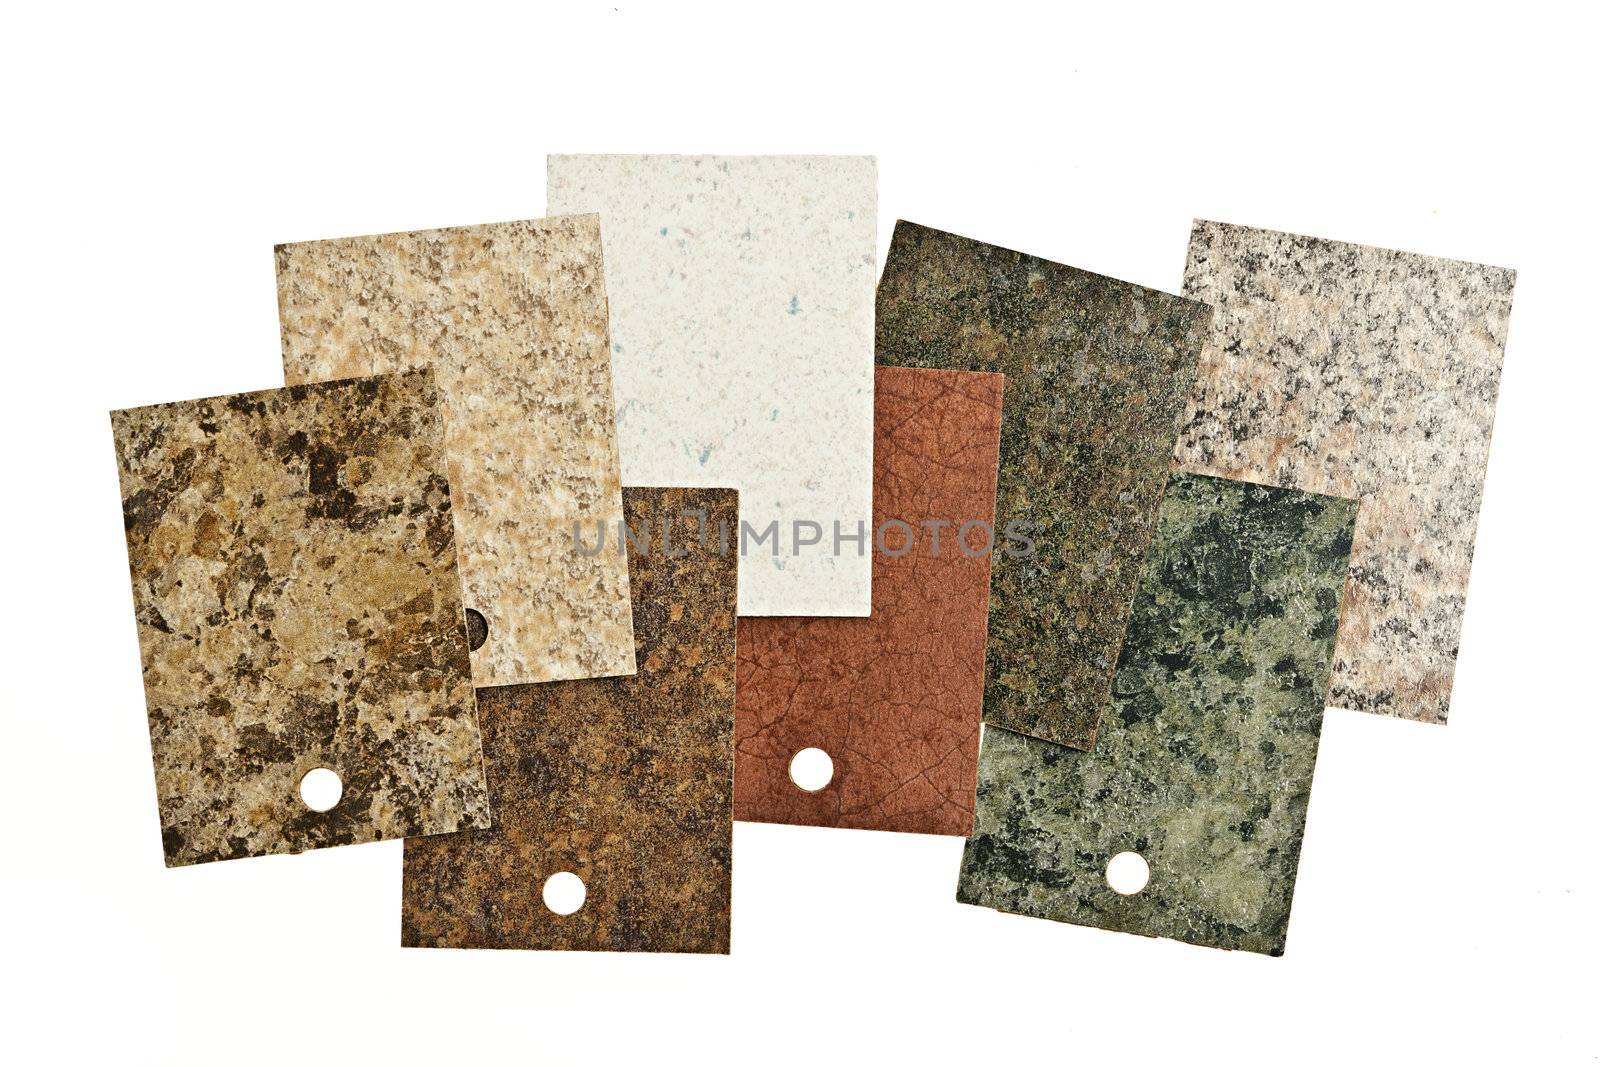 Countertop samples on white by elenathewise